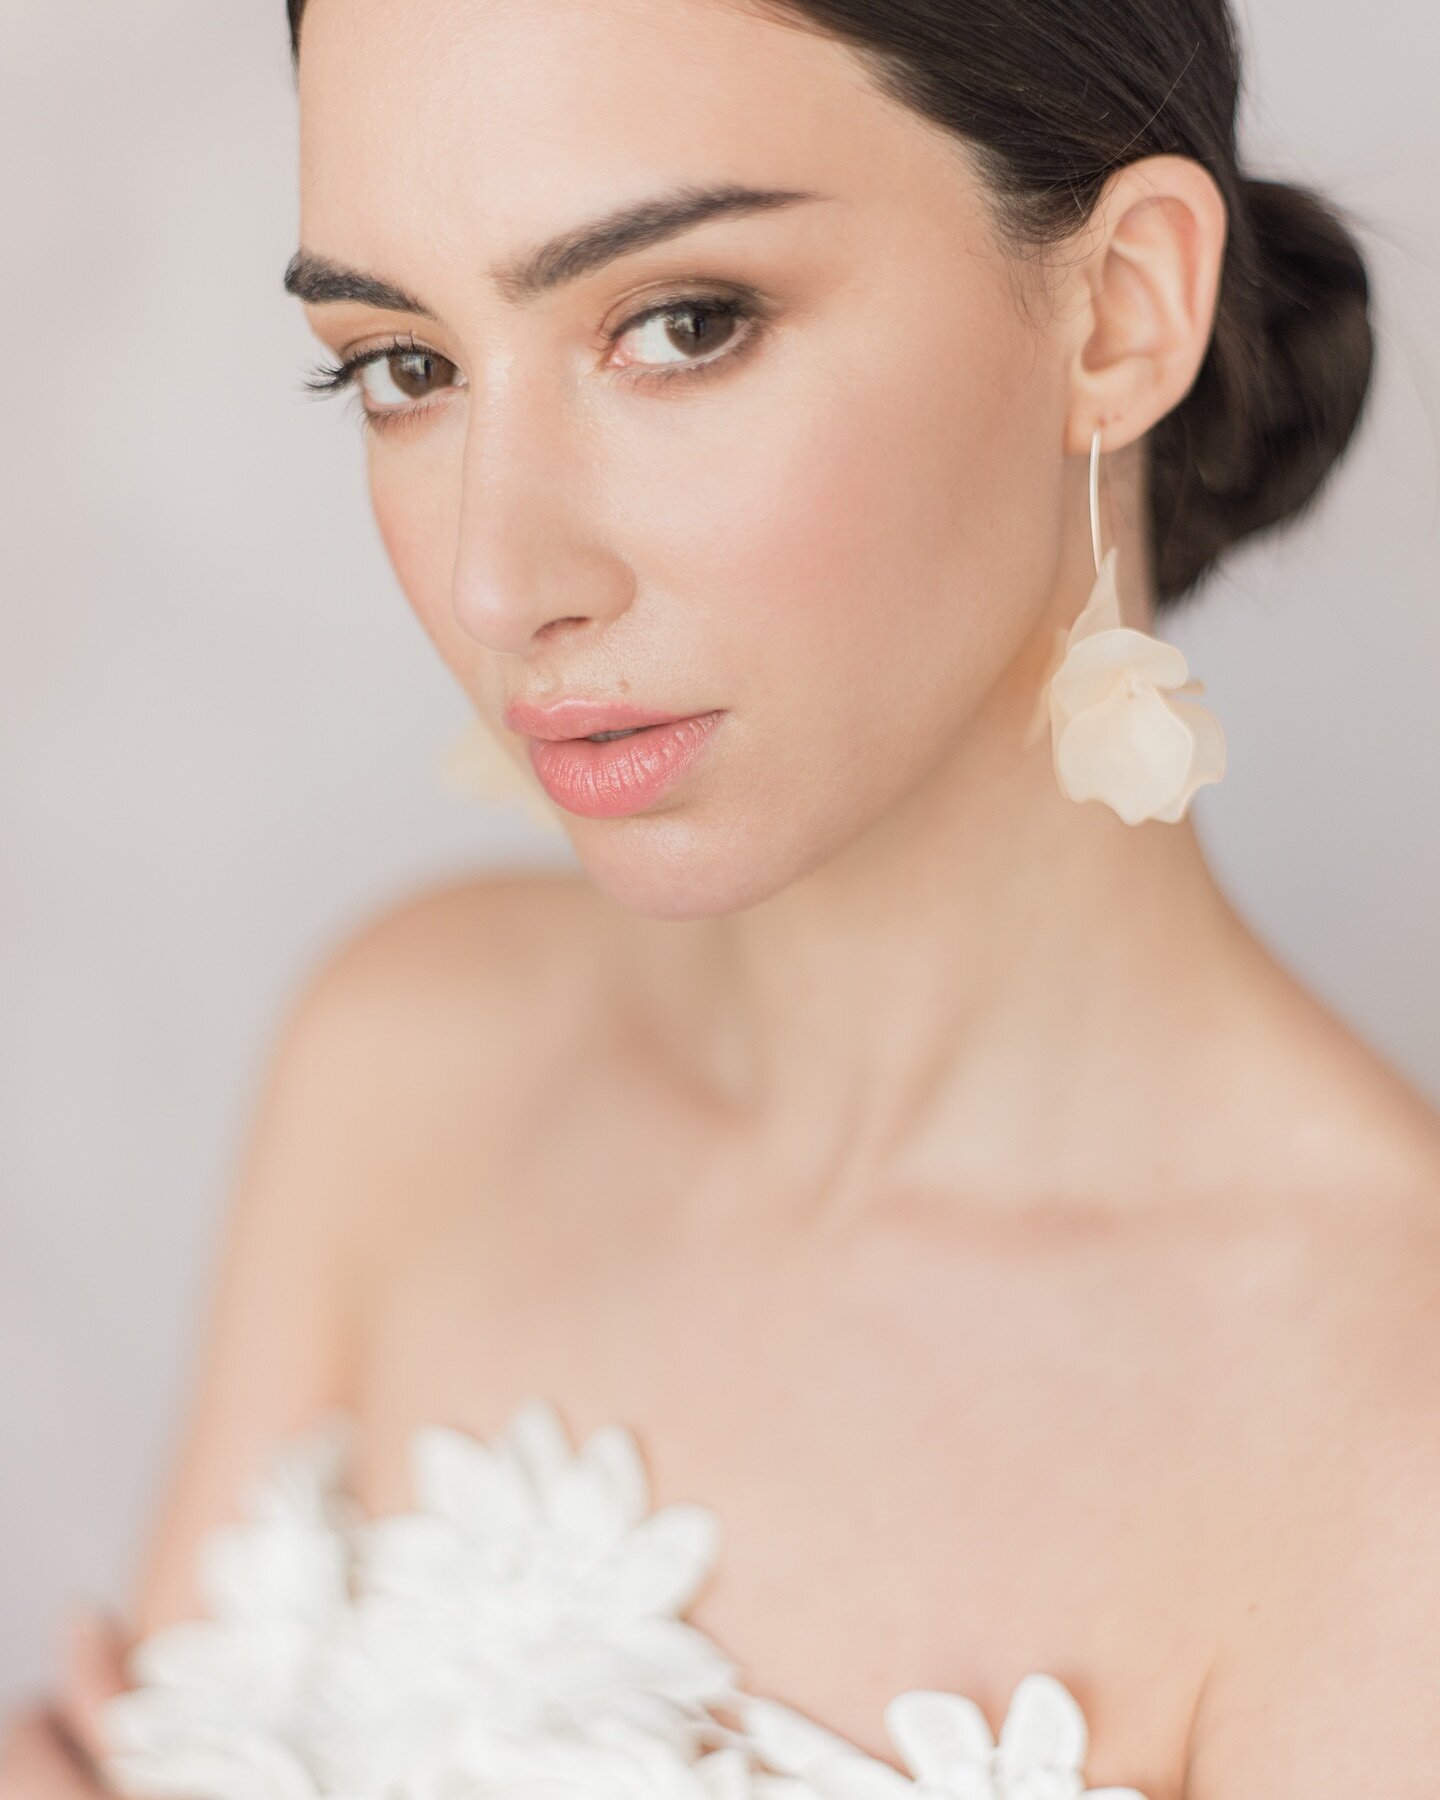 Bridal portrait for 🤍 Photographer @maddy.christina.photo @maddy.photo.gcc - Muah by me  #makeupartistparis#bridalmakeupartistfrenchriviera#makeupartistcannes#parisbridalmakeup#lakecomobridalmakeup